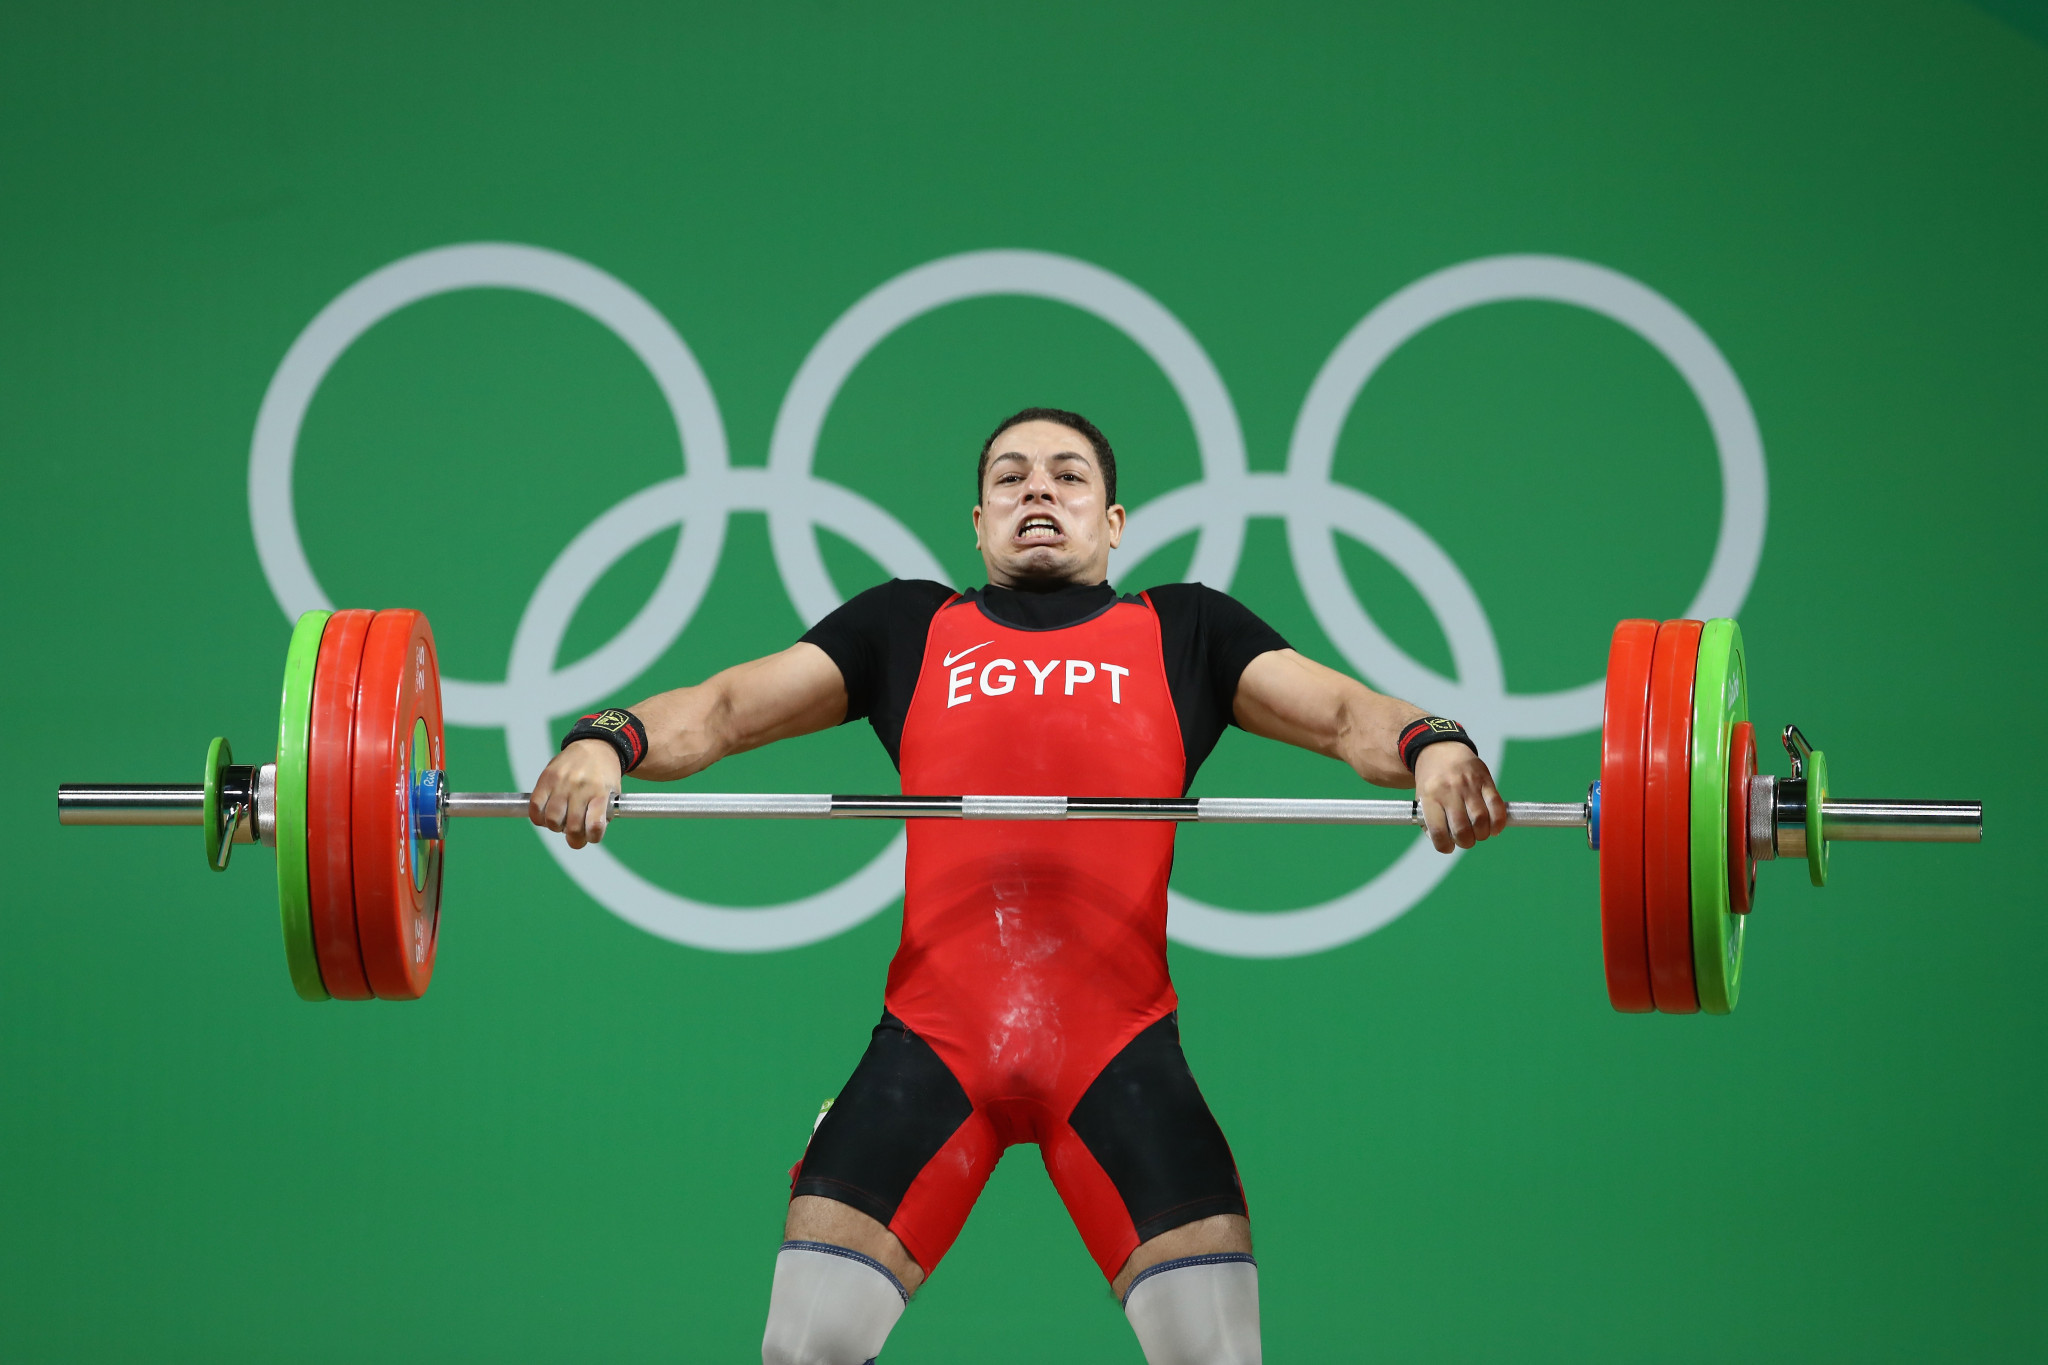 Egyptian weightlifters were unable to compete at the Tokyo 2020 Olympics ©Getty Images